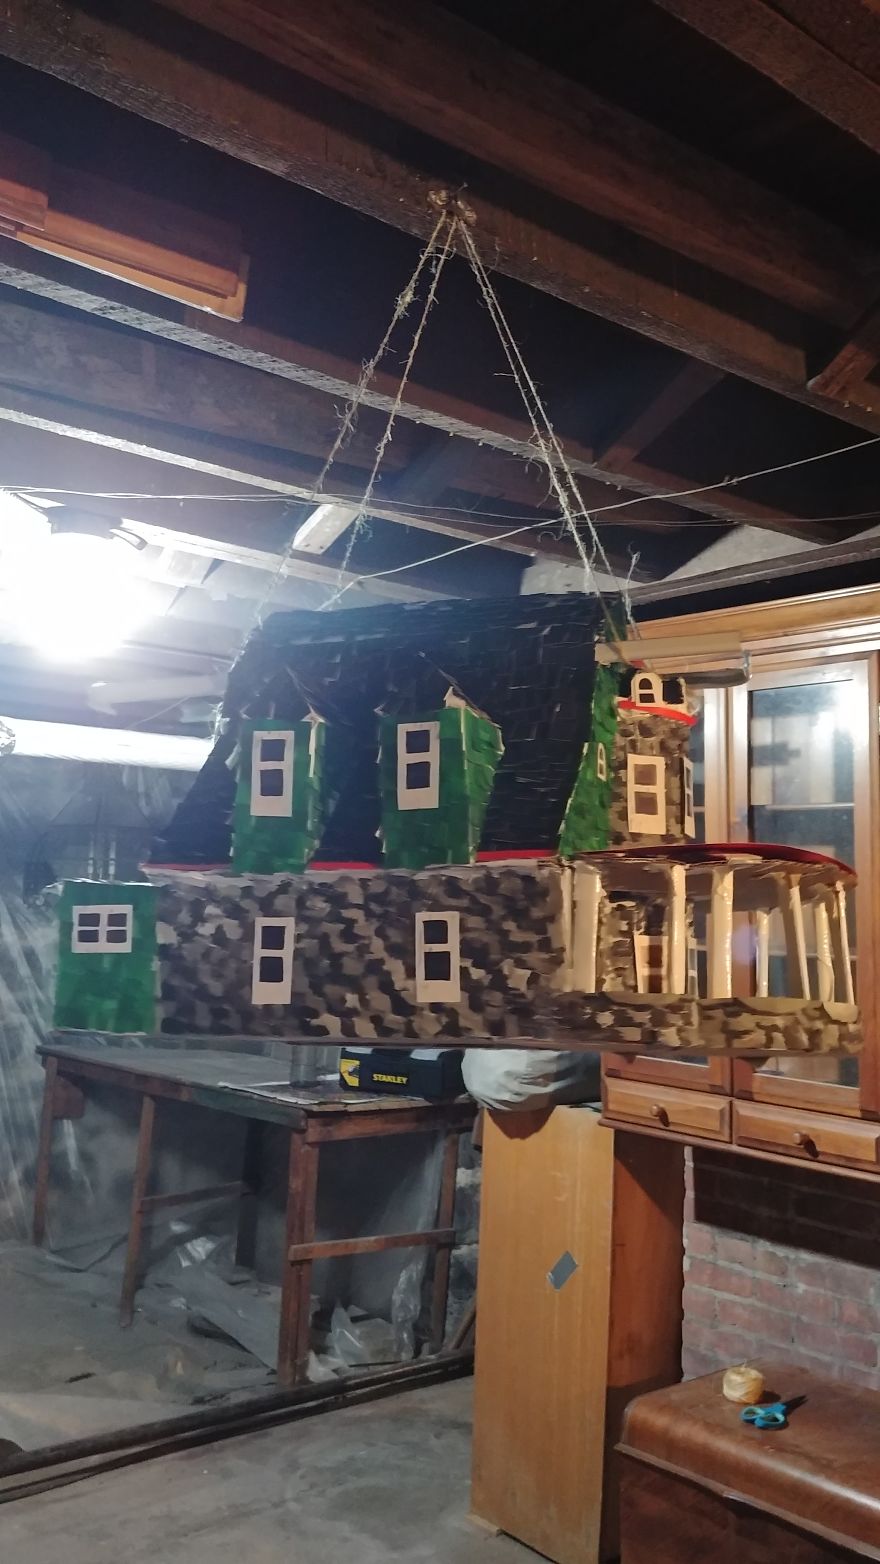 We Spent Over 24 Hours Making A Replica Of Our 120-Year-Old House That We Purchased This July (13 Pics)